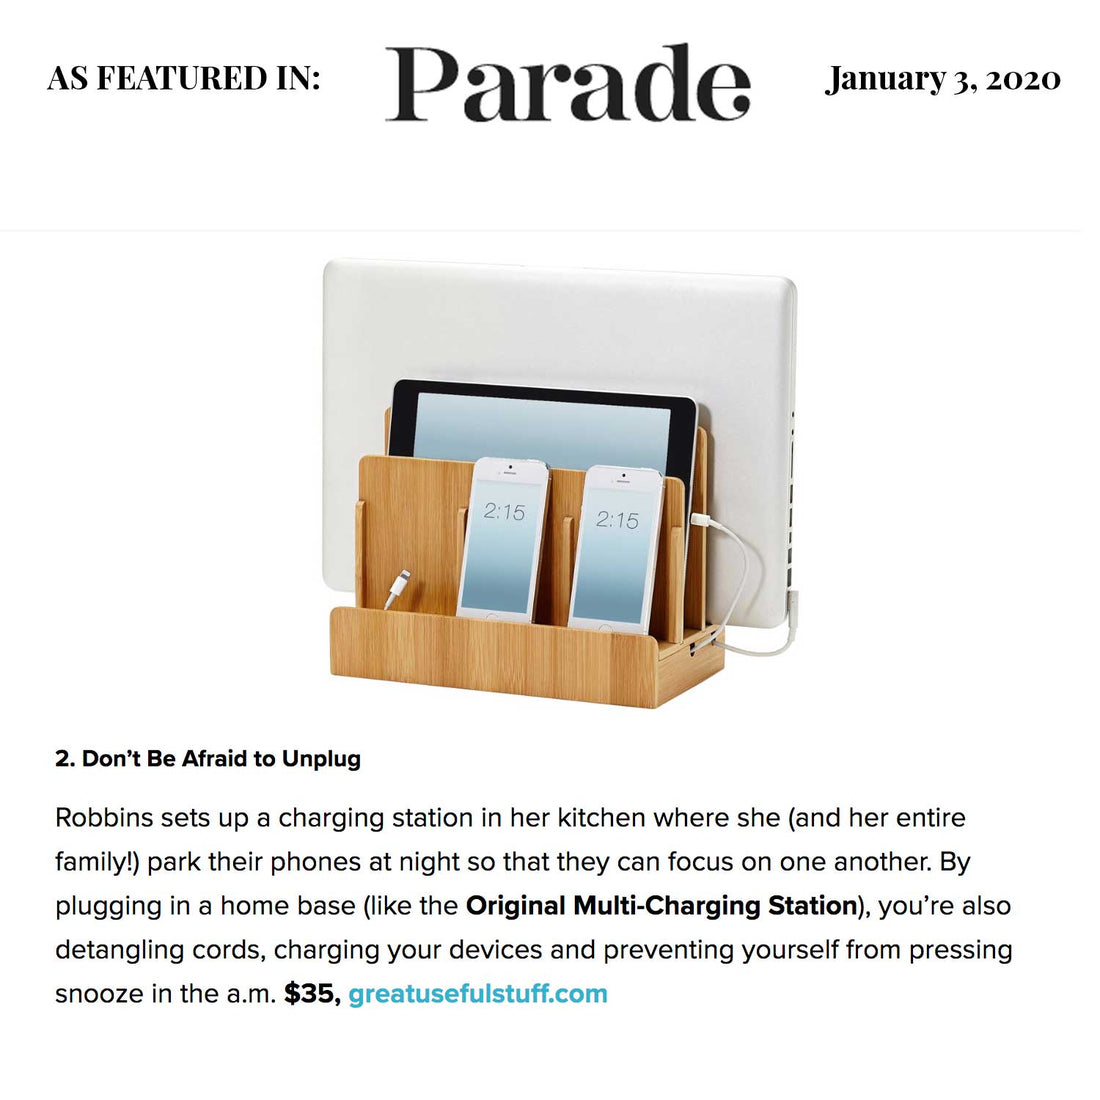 Our Multi Featured in Parade Magazine!